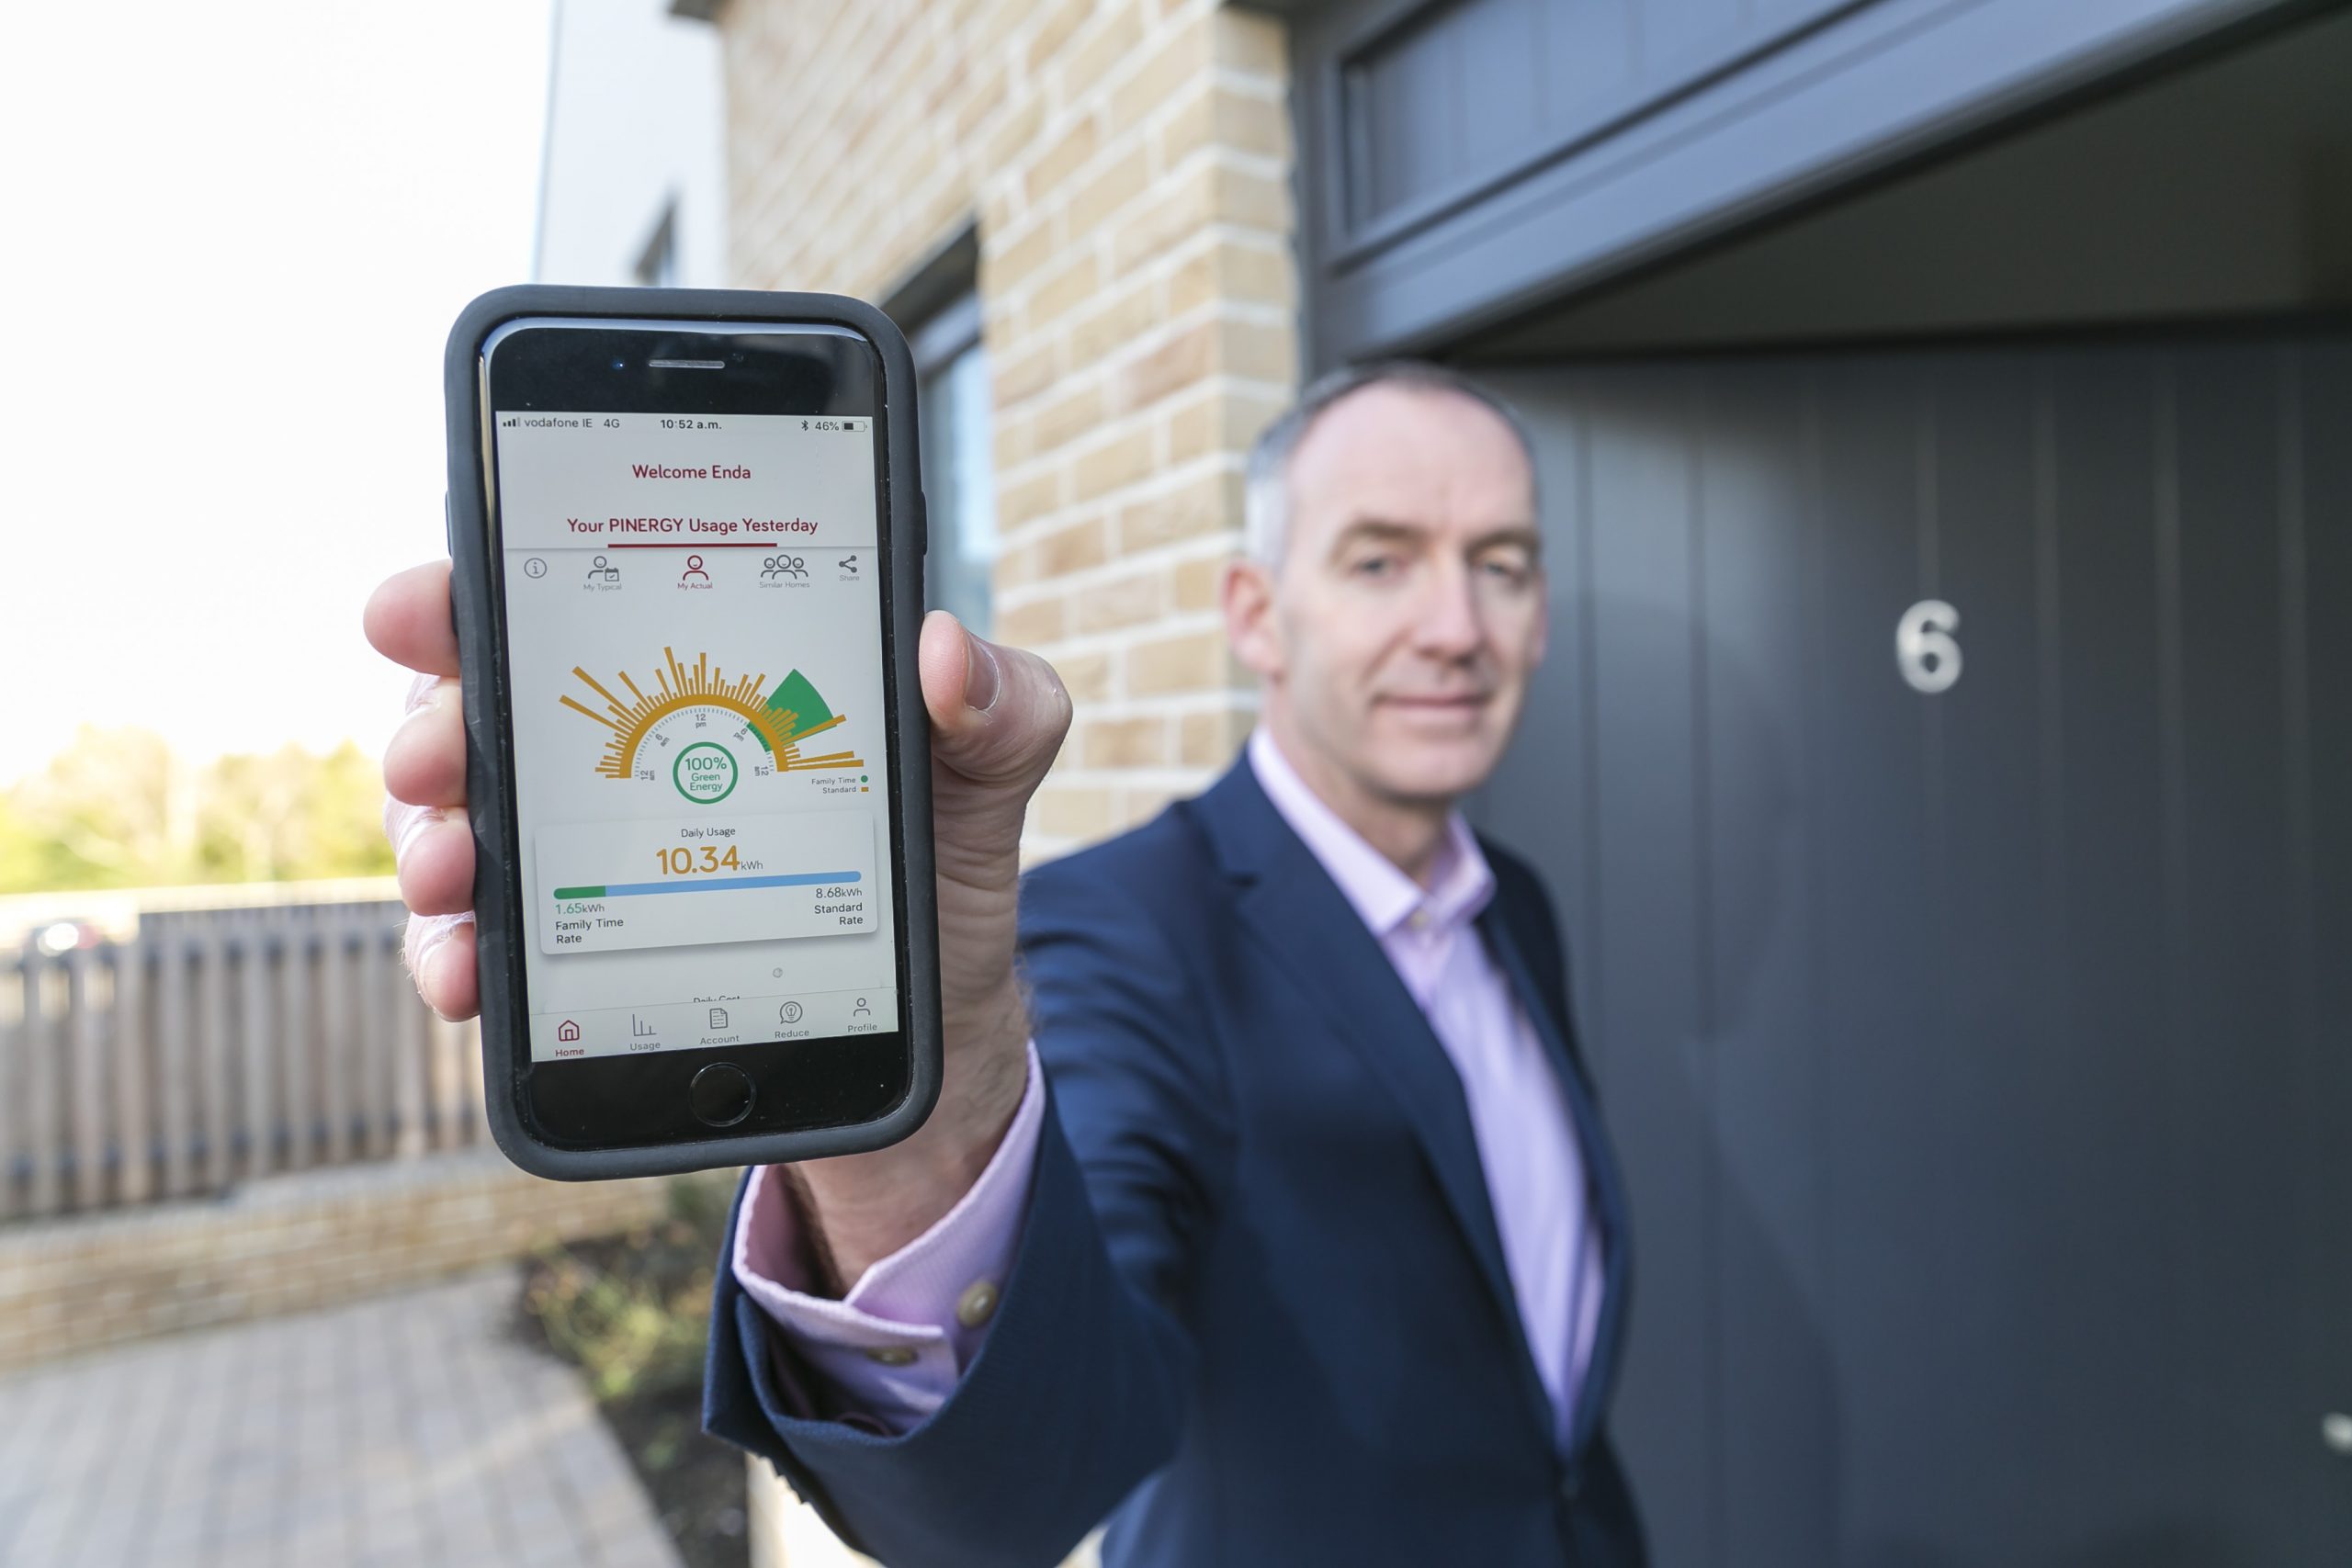 Pinergy launches new Lifestyle plans to empower homes with Smart Meters